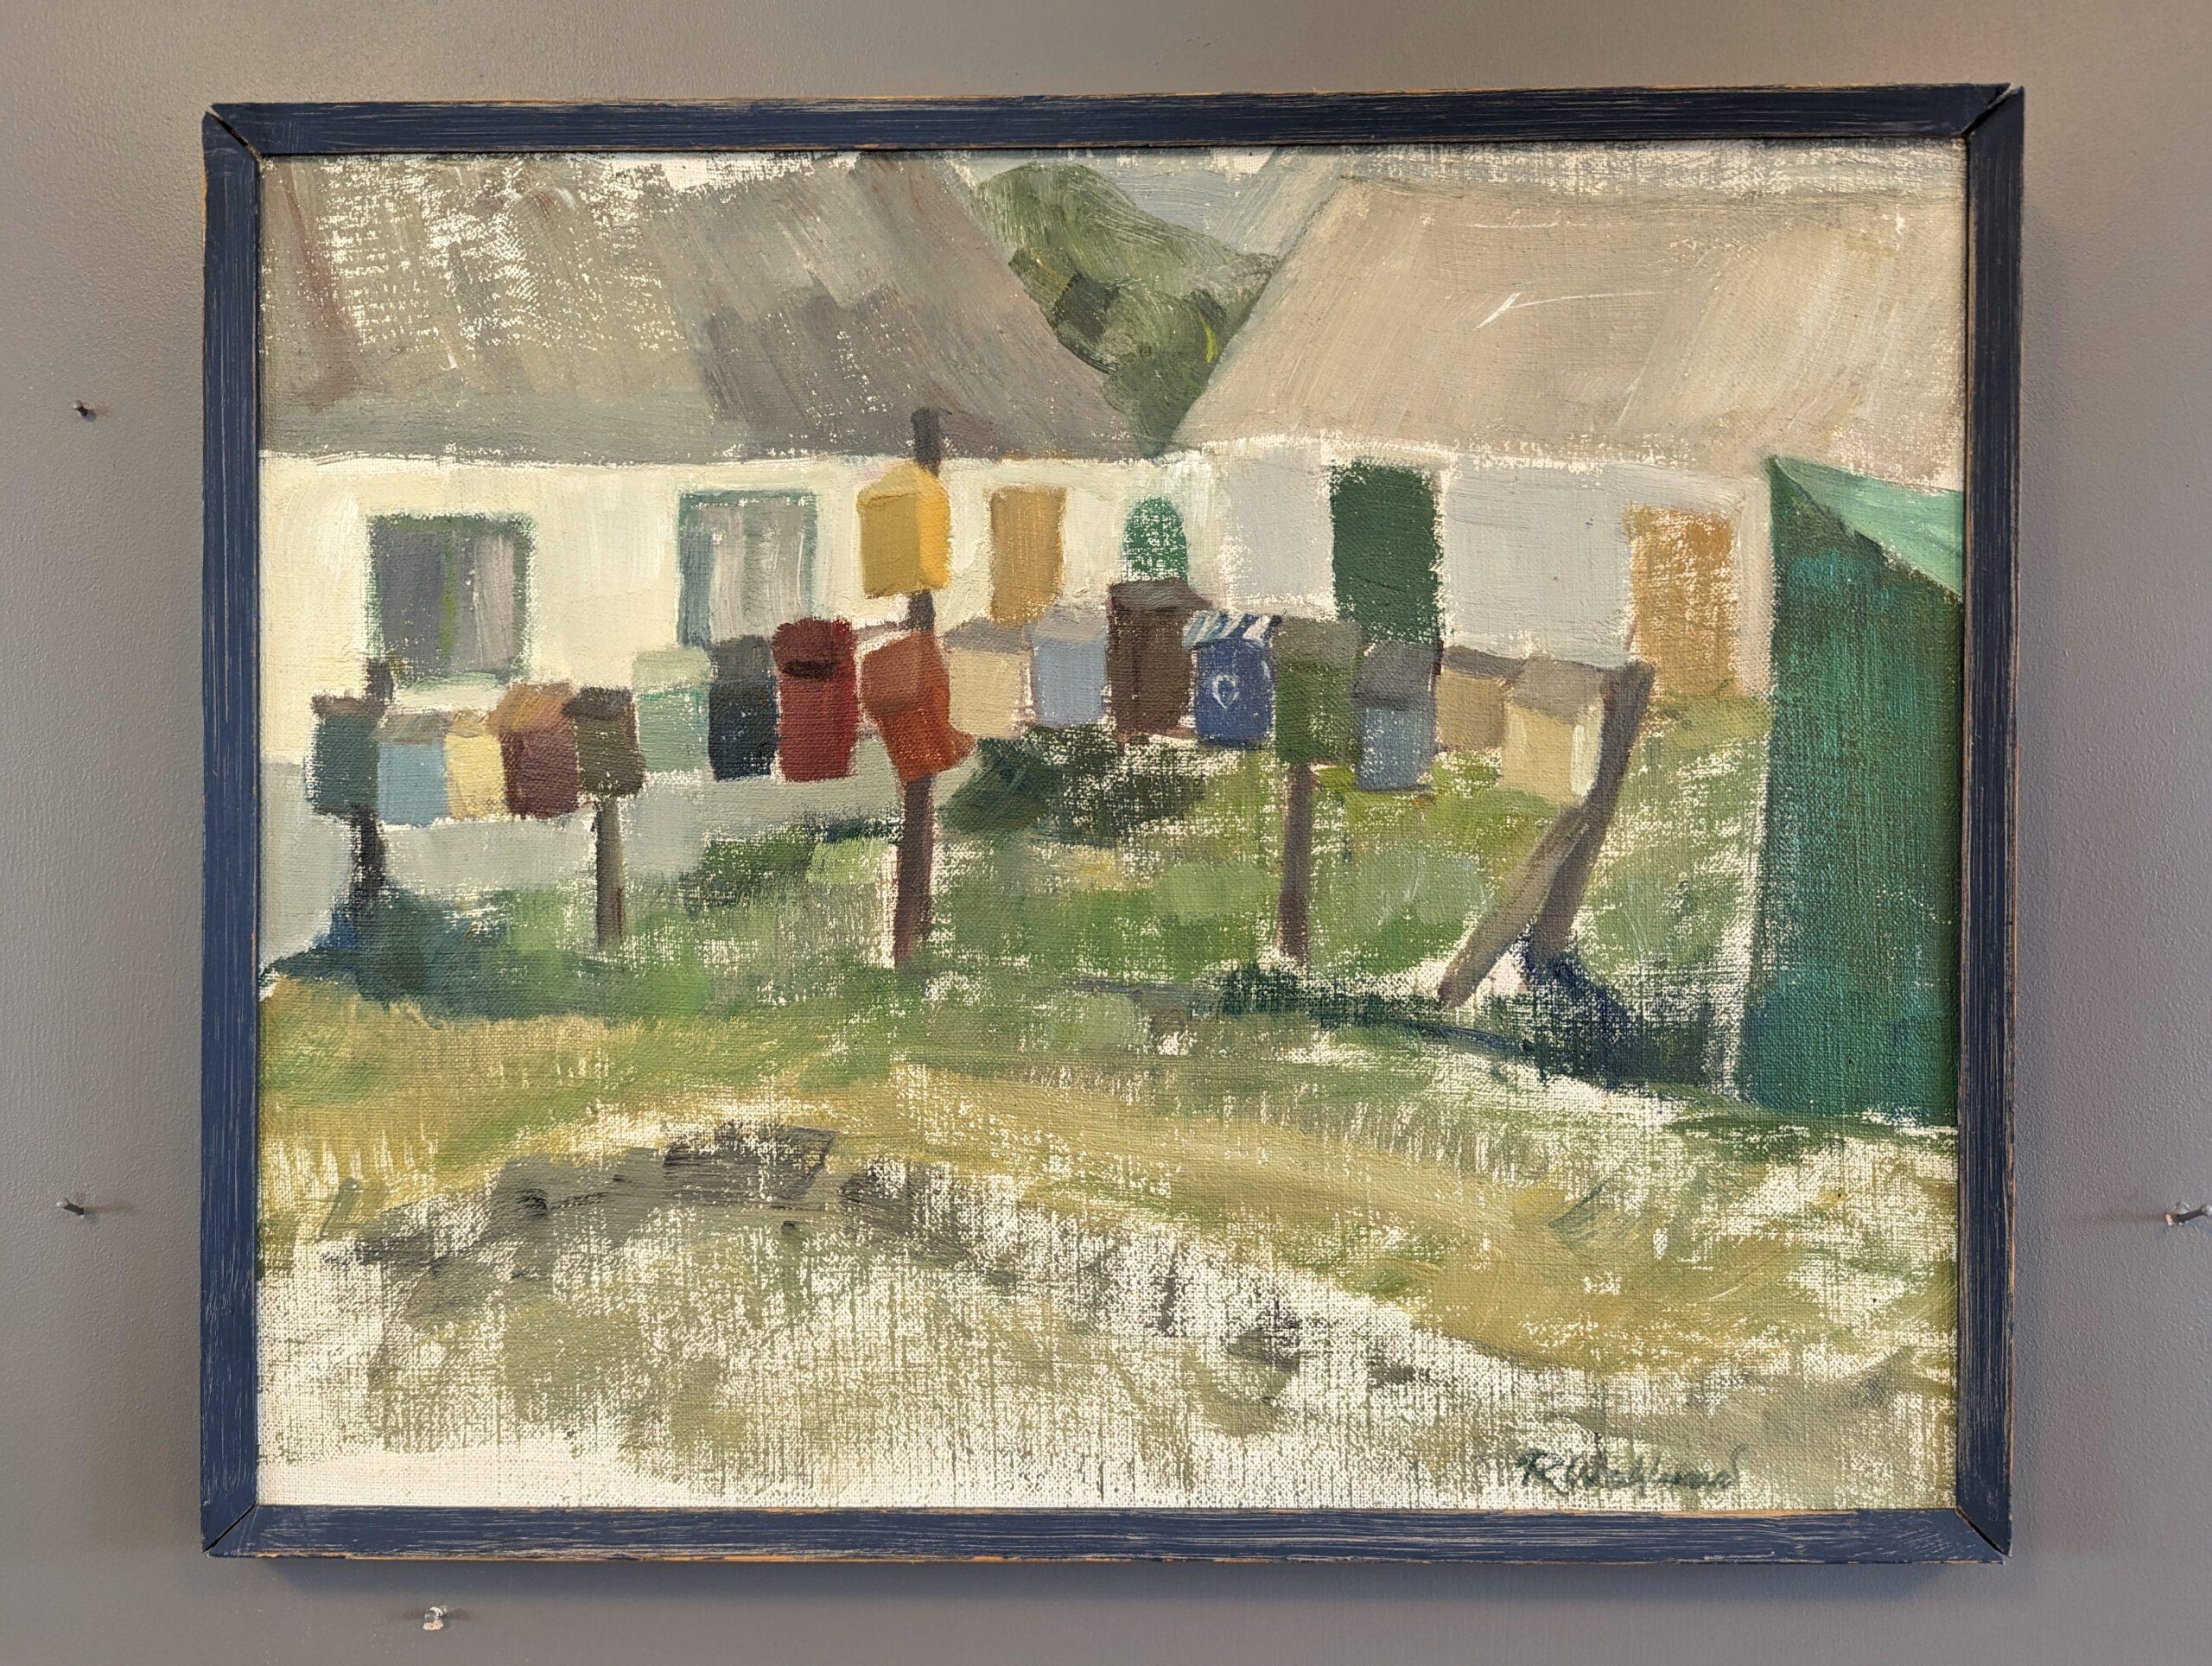 LITTLE BOXES
Size: 35 x 44 cm (including frame)
Oil on Canvas

A brilliantly executed modernist landscape scene in oil, painted onto canvas and dated 1961.

This mid century composition features a courtyard area surrounded by farmhouses. In the